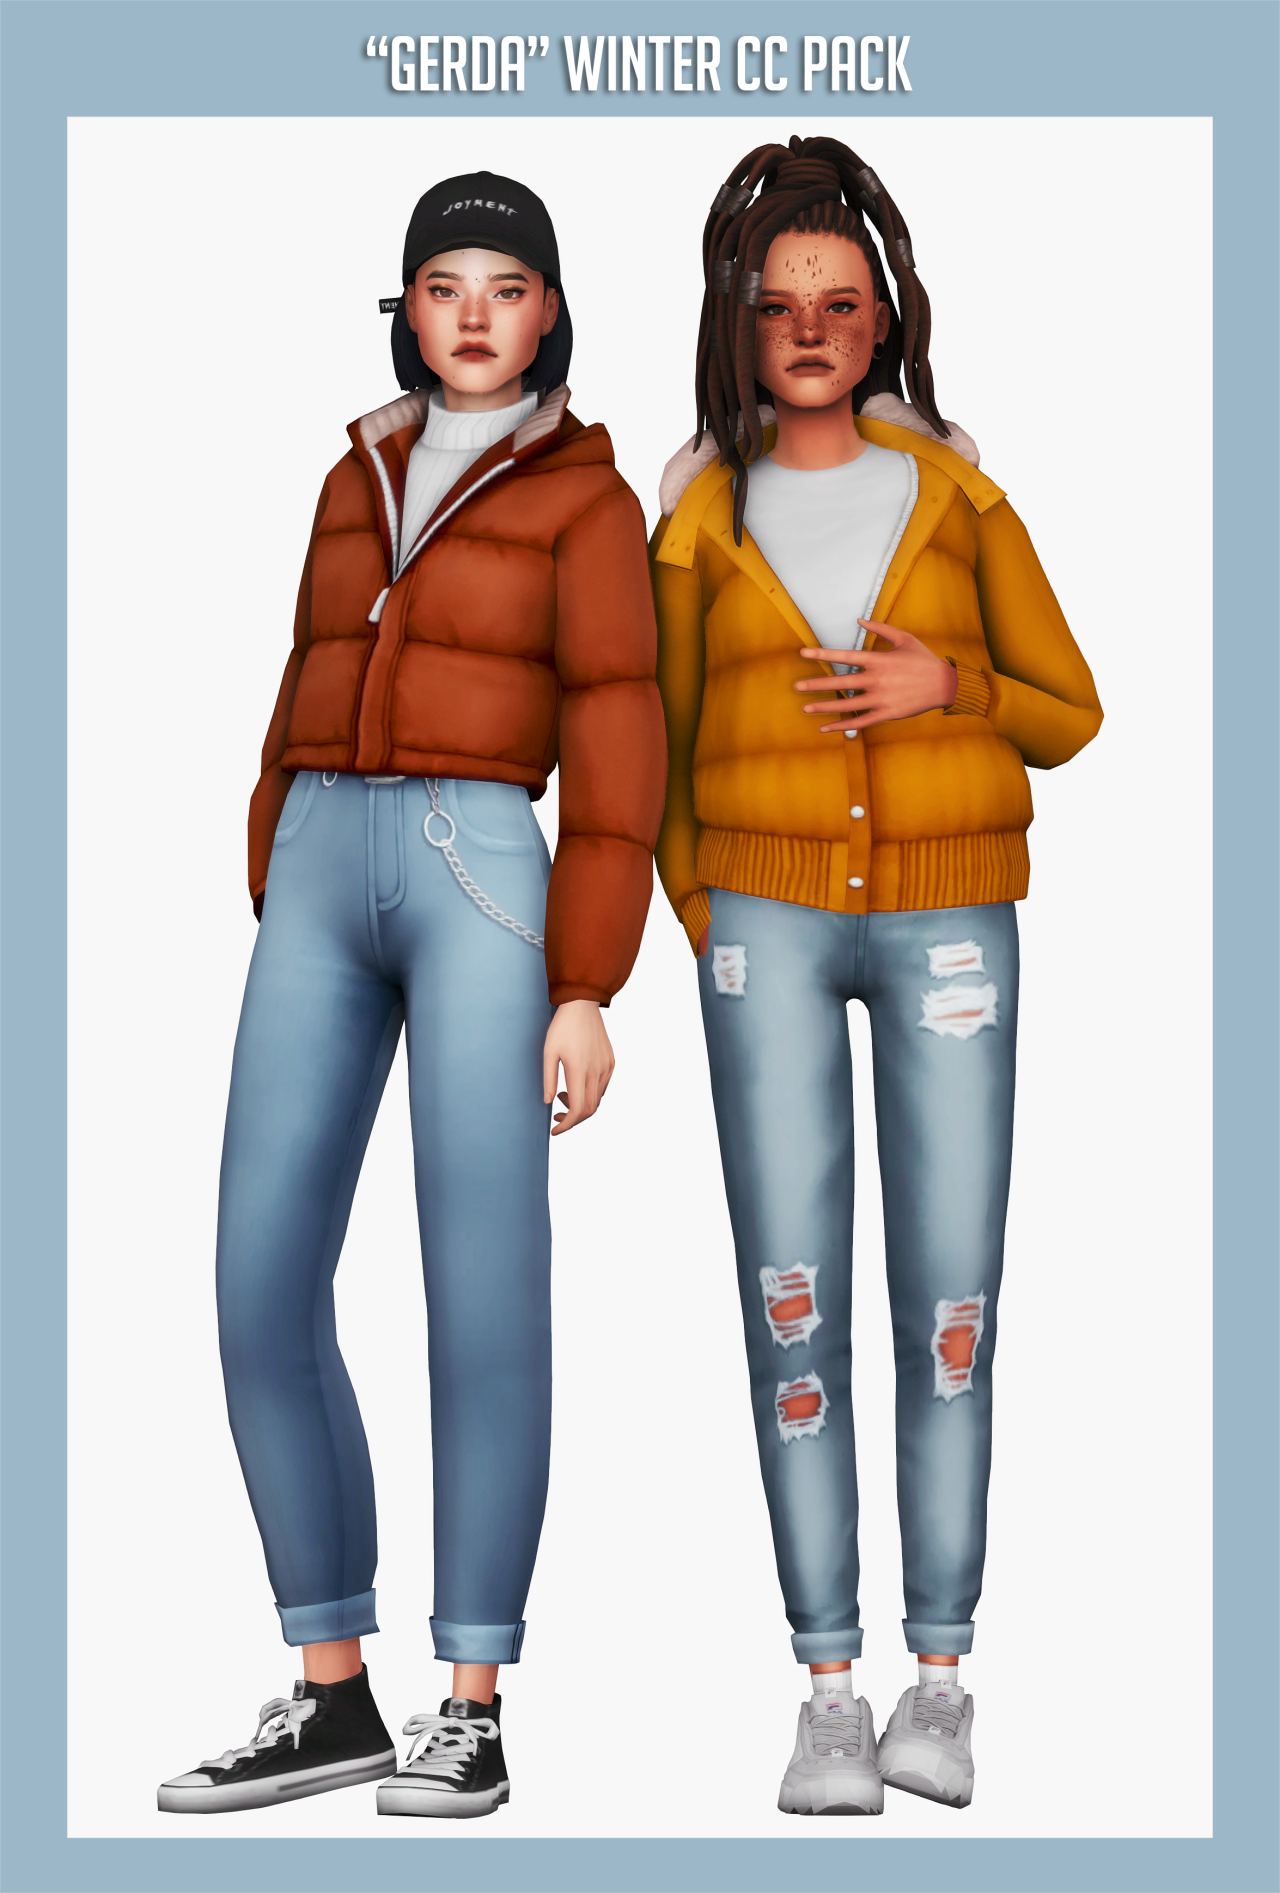 Sims 4 Winter Clothes Cc Pack Sims 4 Winter Clothes Cc Pack - Margaret Wiegel™. Jul 2023